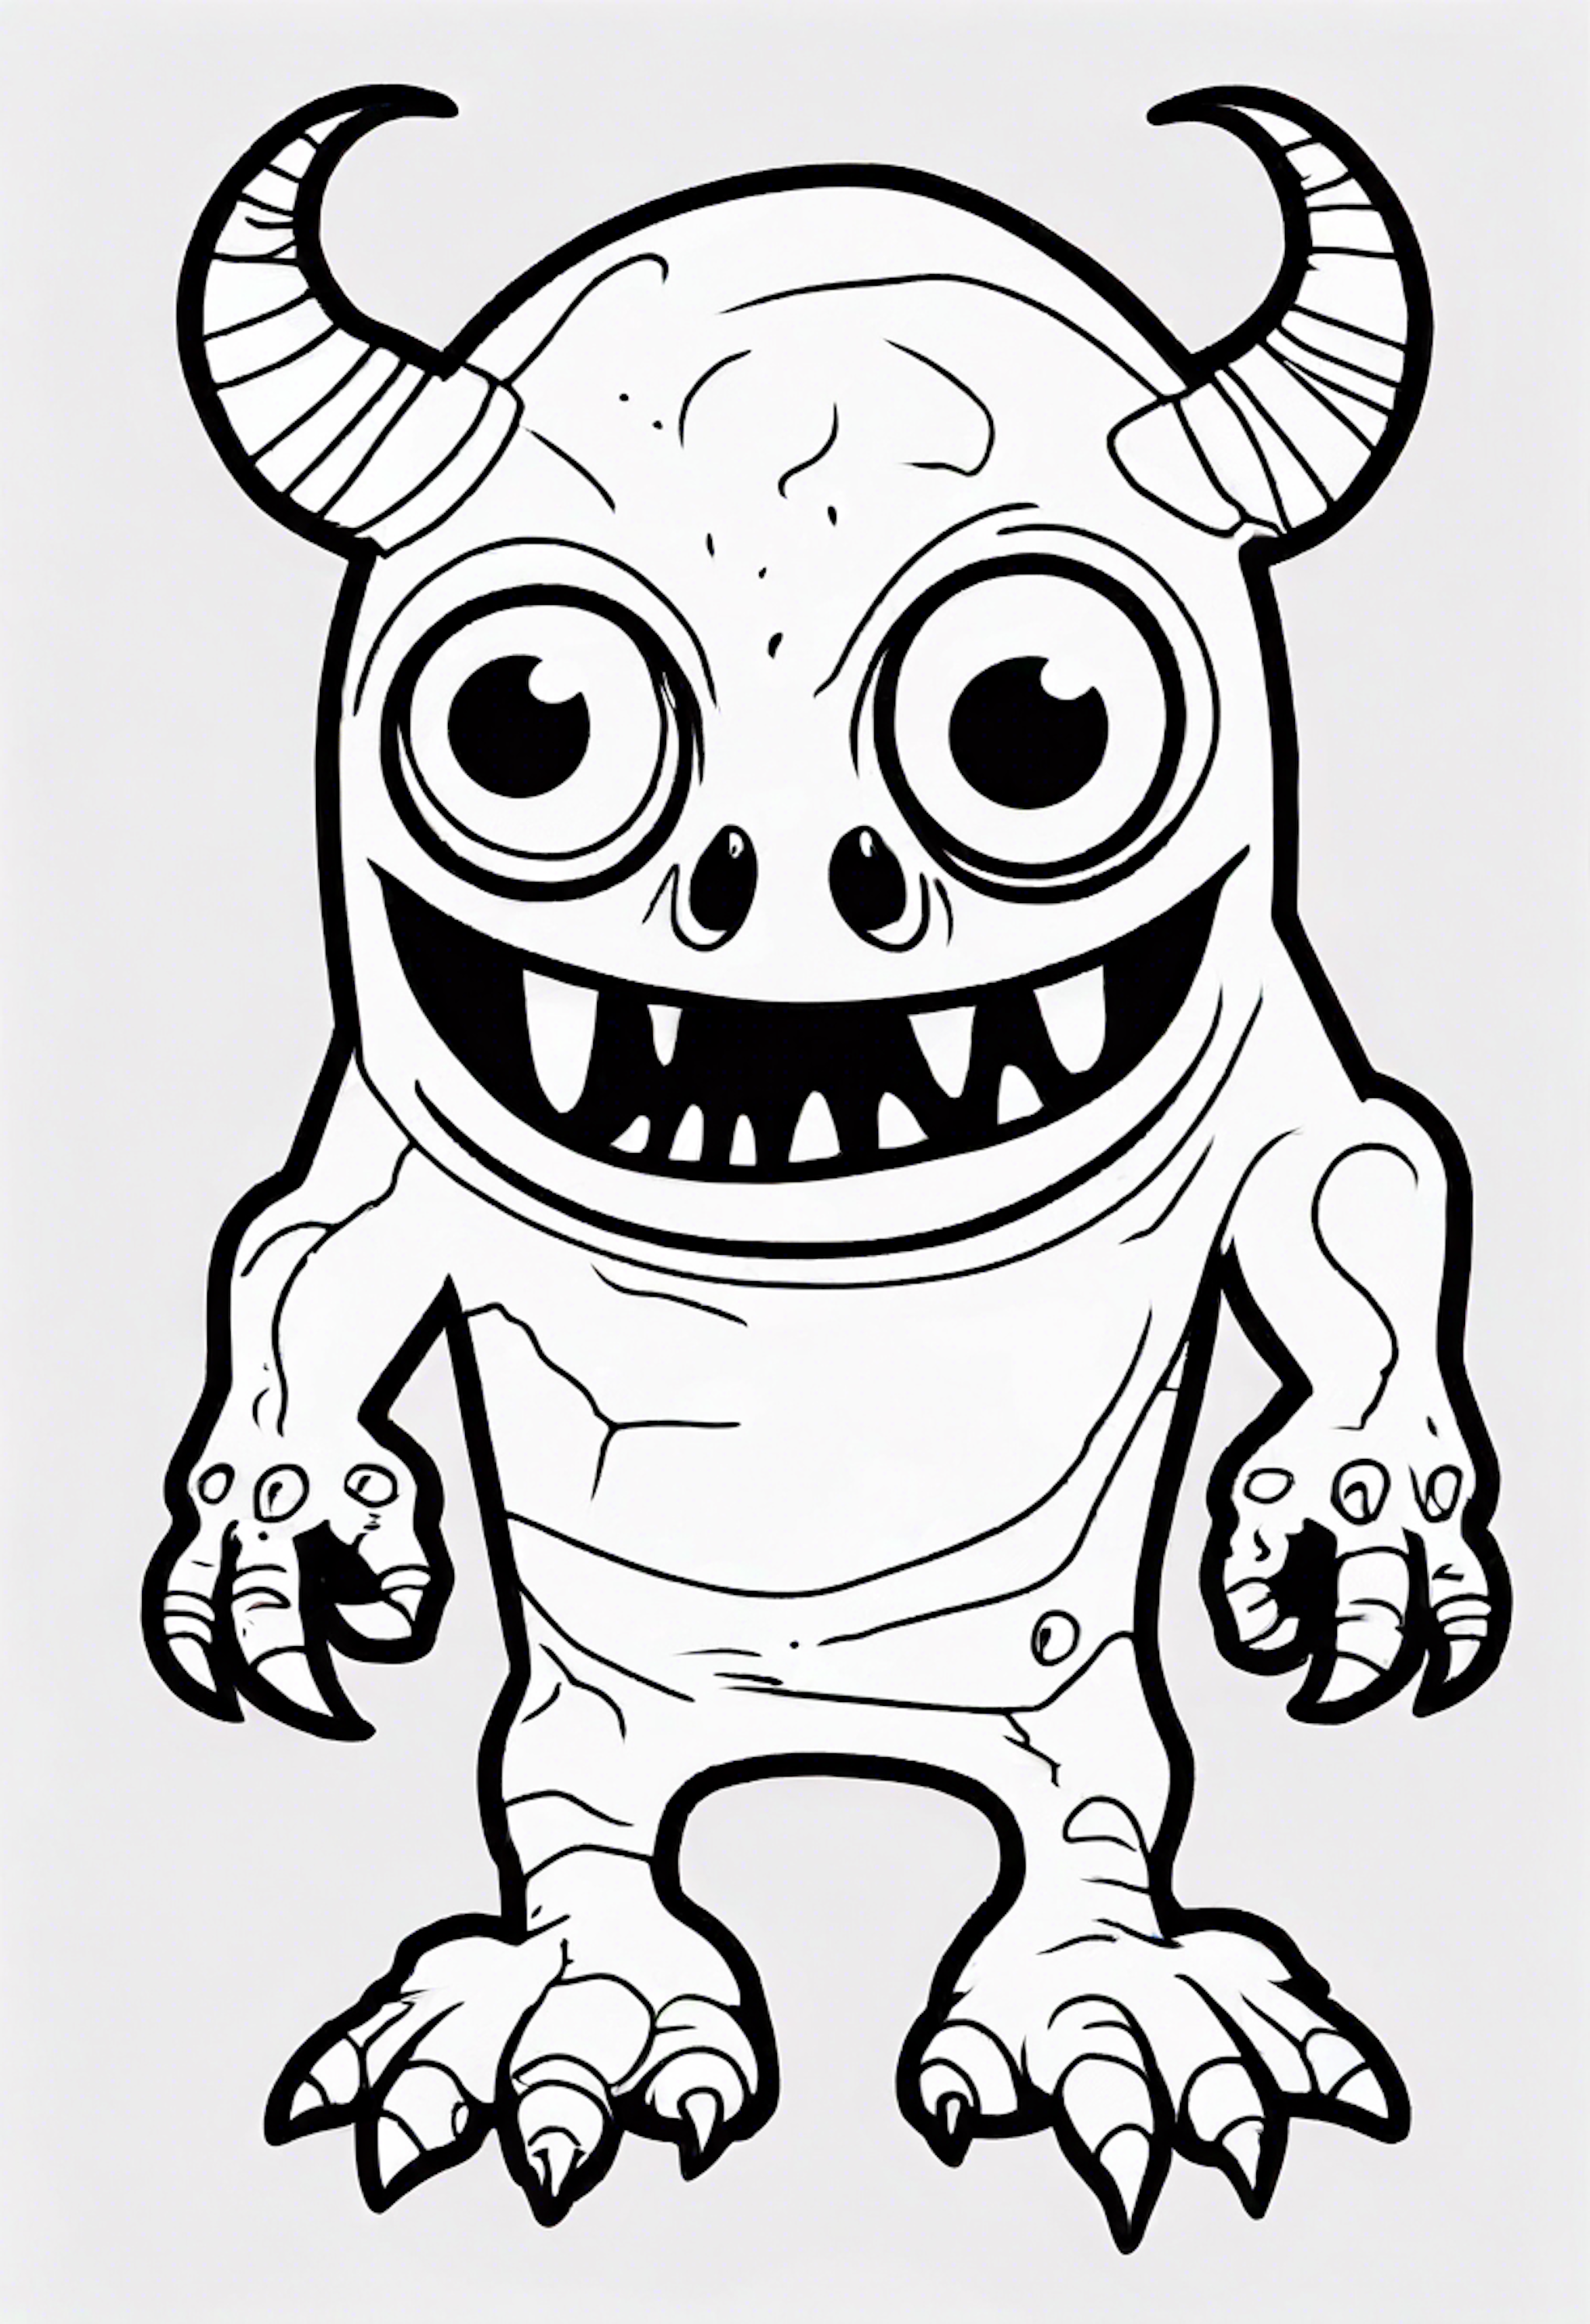 A coloring page for 1 Monster coloring pages